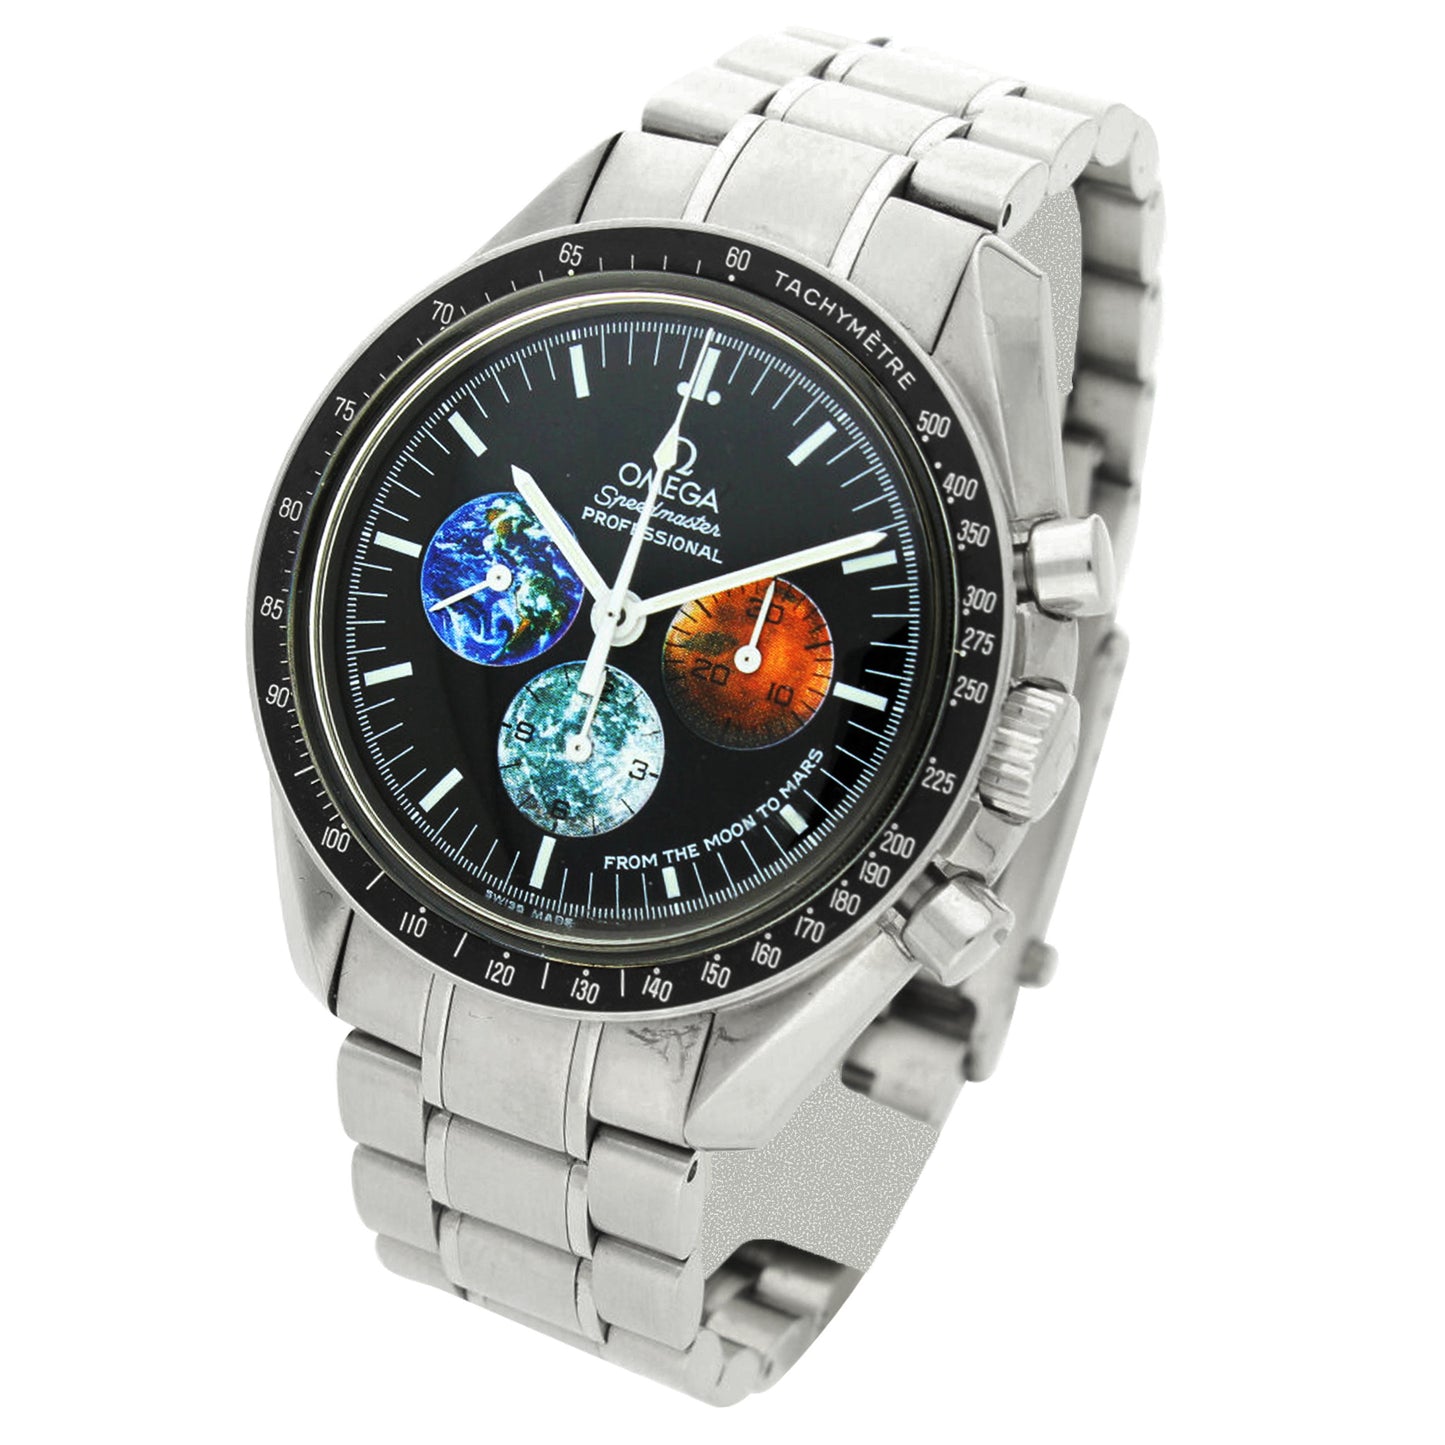 Stainless steel Speedmaster "Moon to Mars" Professional chronograph wristwatch. Made 2005